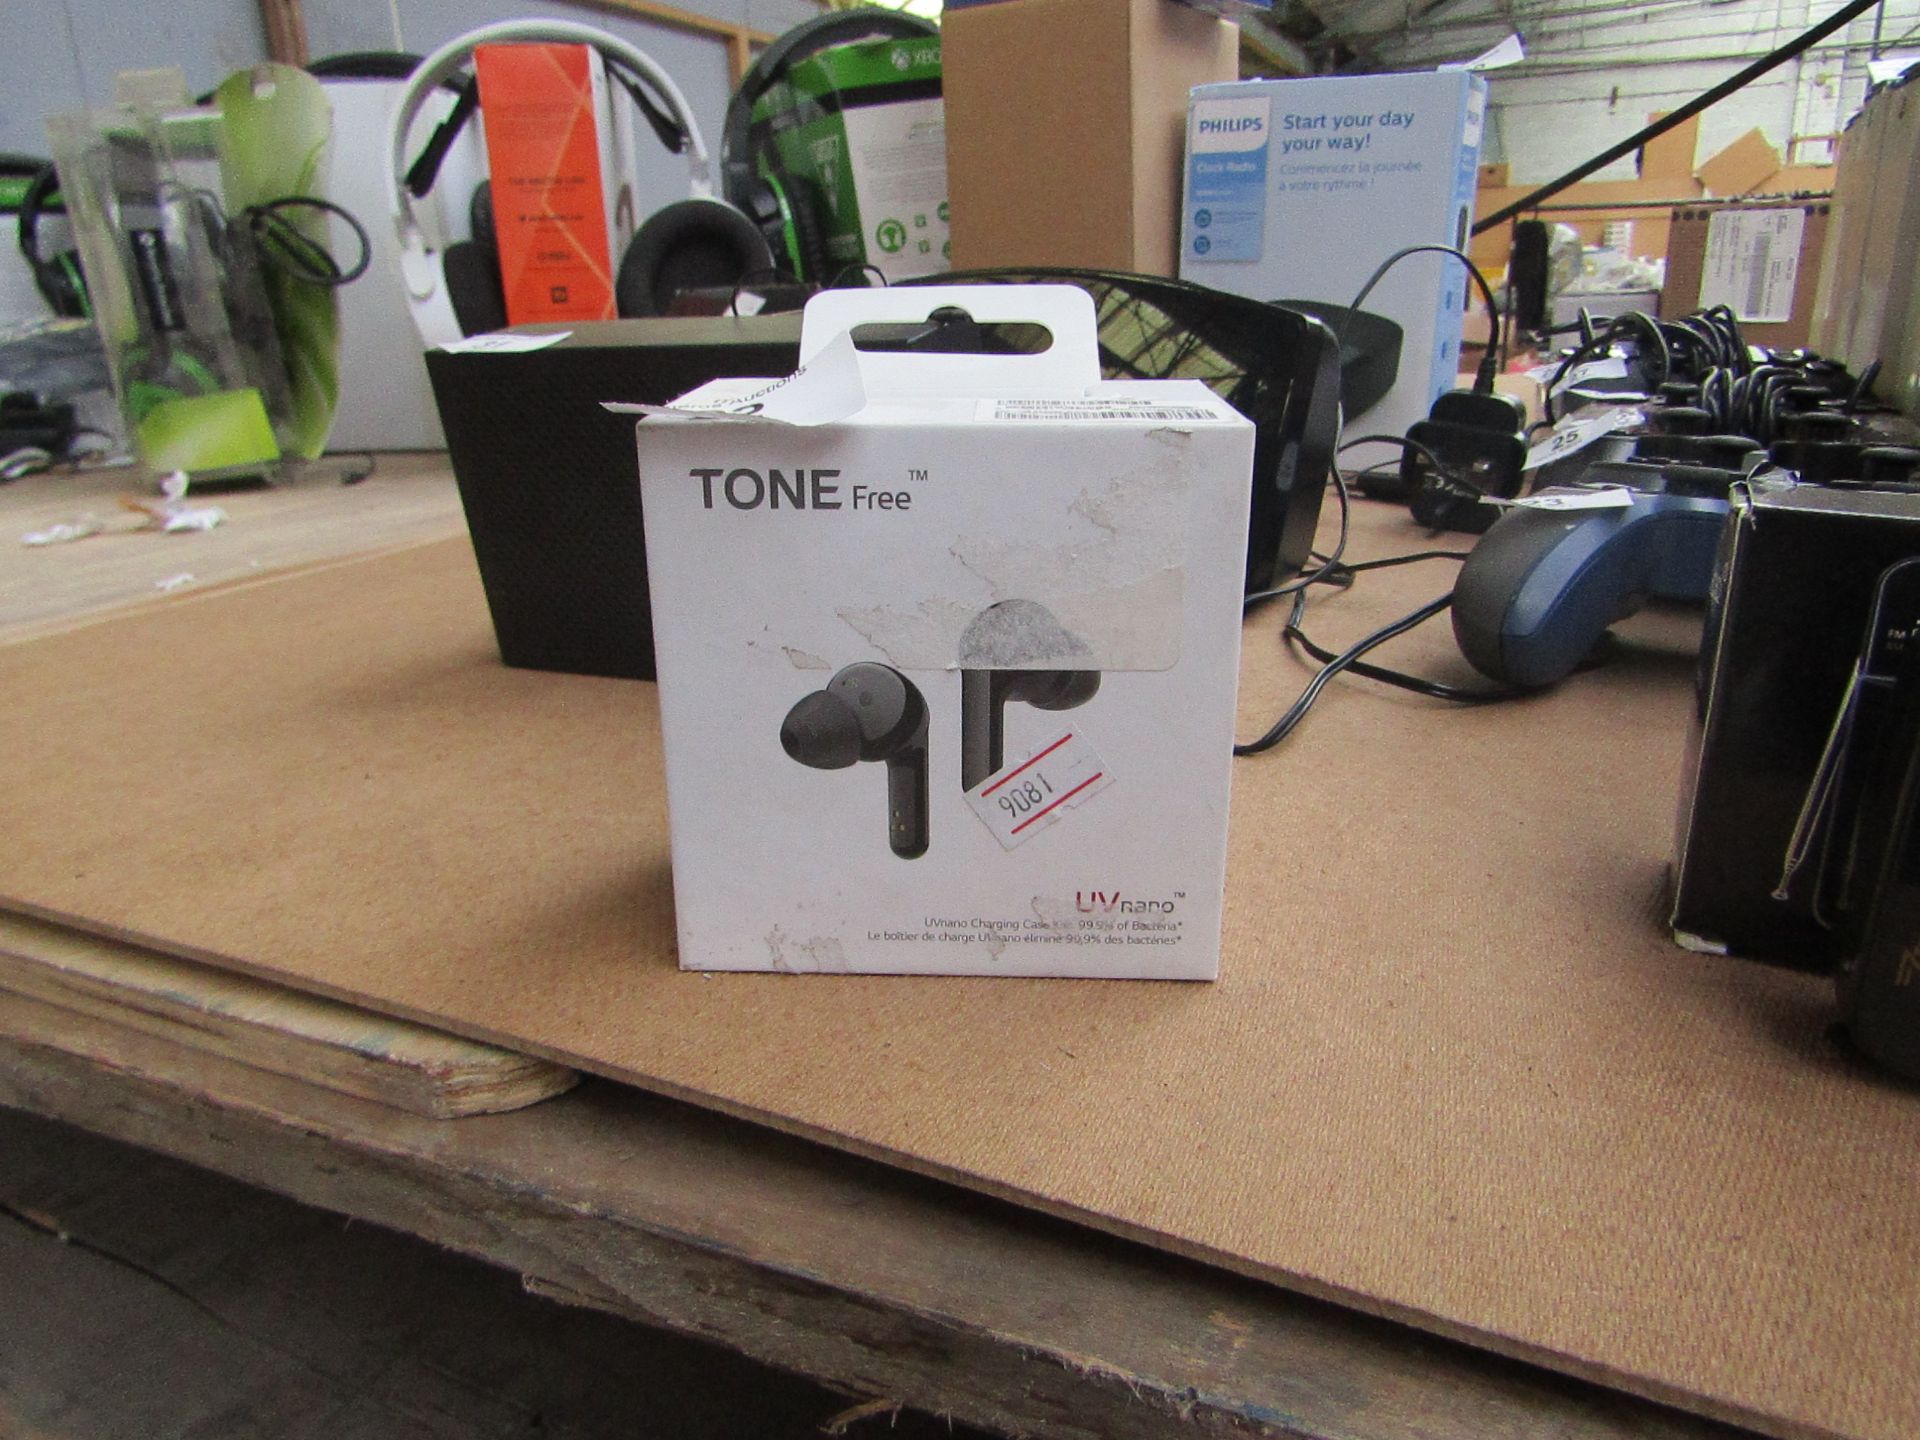 LG Tone Free FN6 Wireless Earbuds - New & Boxed - Unable to test due to app function - RRP £100